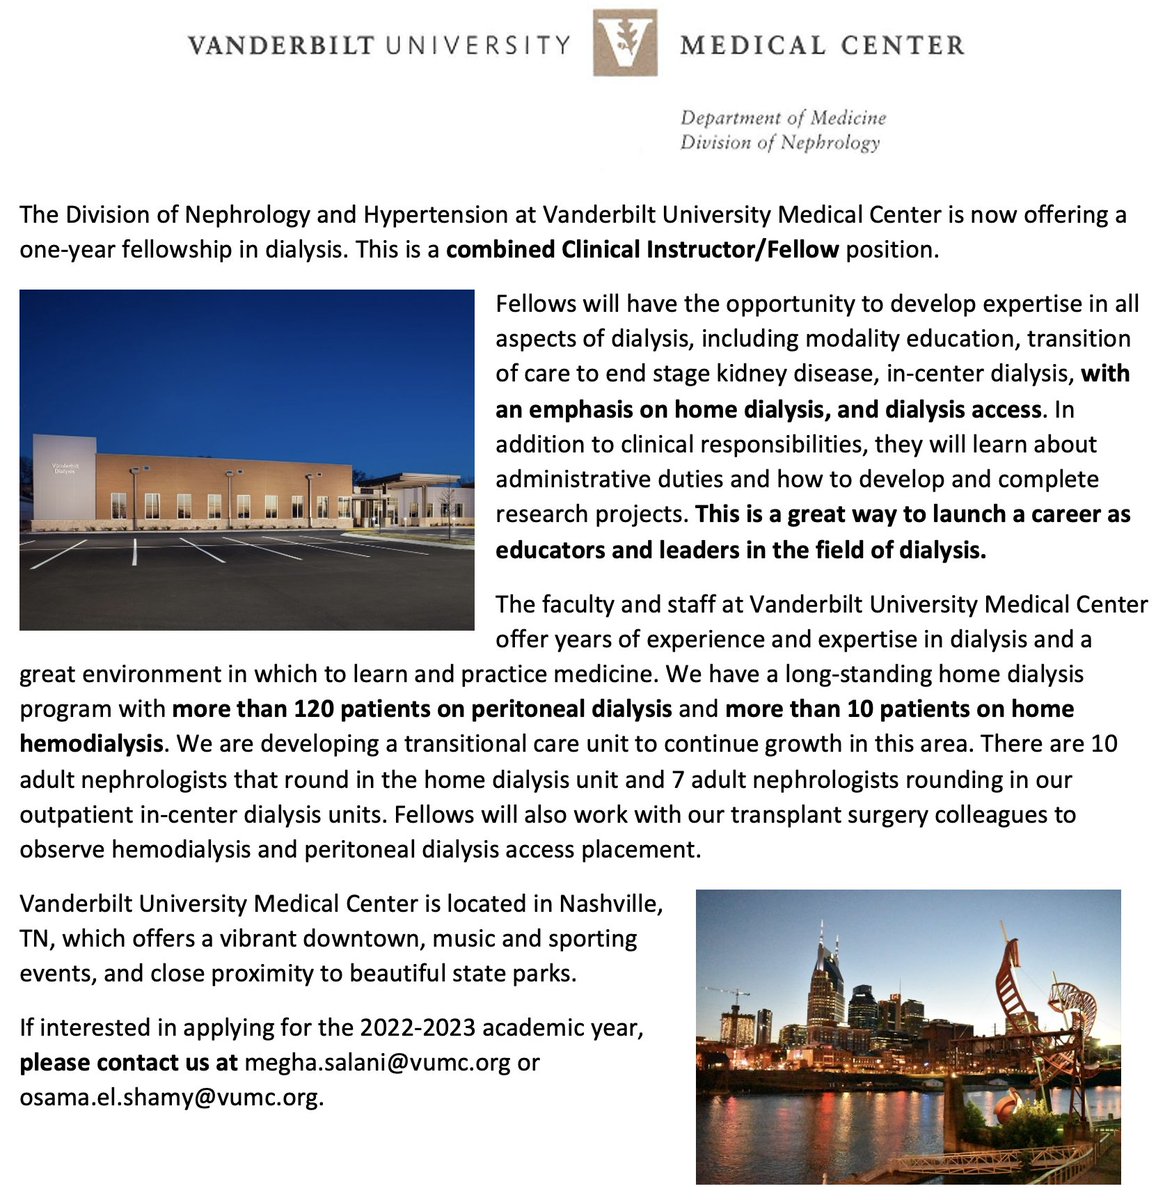 📢 @VUMCKidney is now offering a Dialysis Fellowship (with an emphasis on home dialysis) for the 2022-2023 academic year! This is a combined Clinical Instructor/Fellow position with @m_salani and @osamaelshamy88 as program directors. Interested candidates: DM or email us!